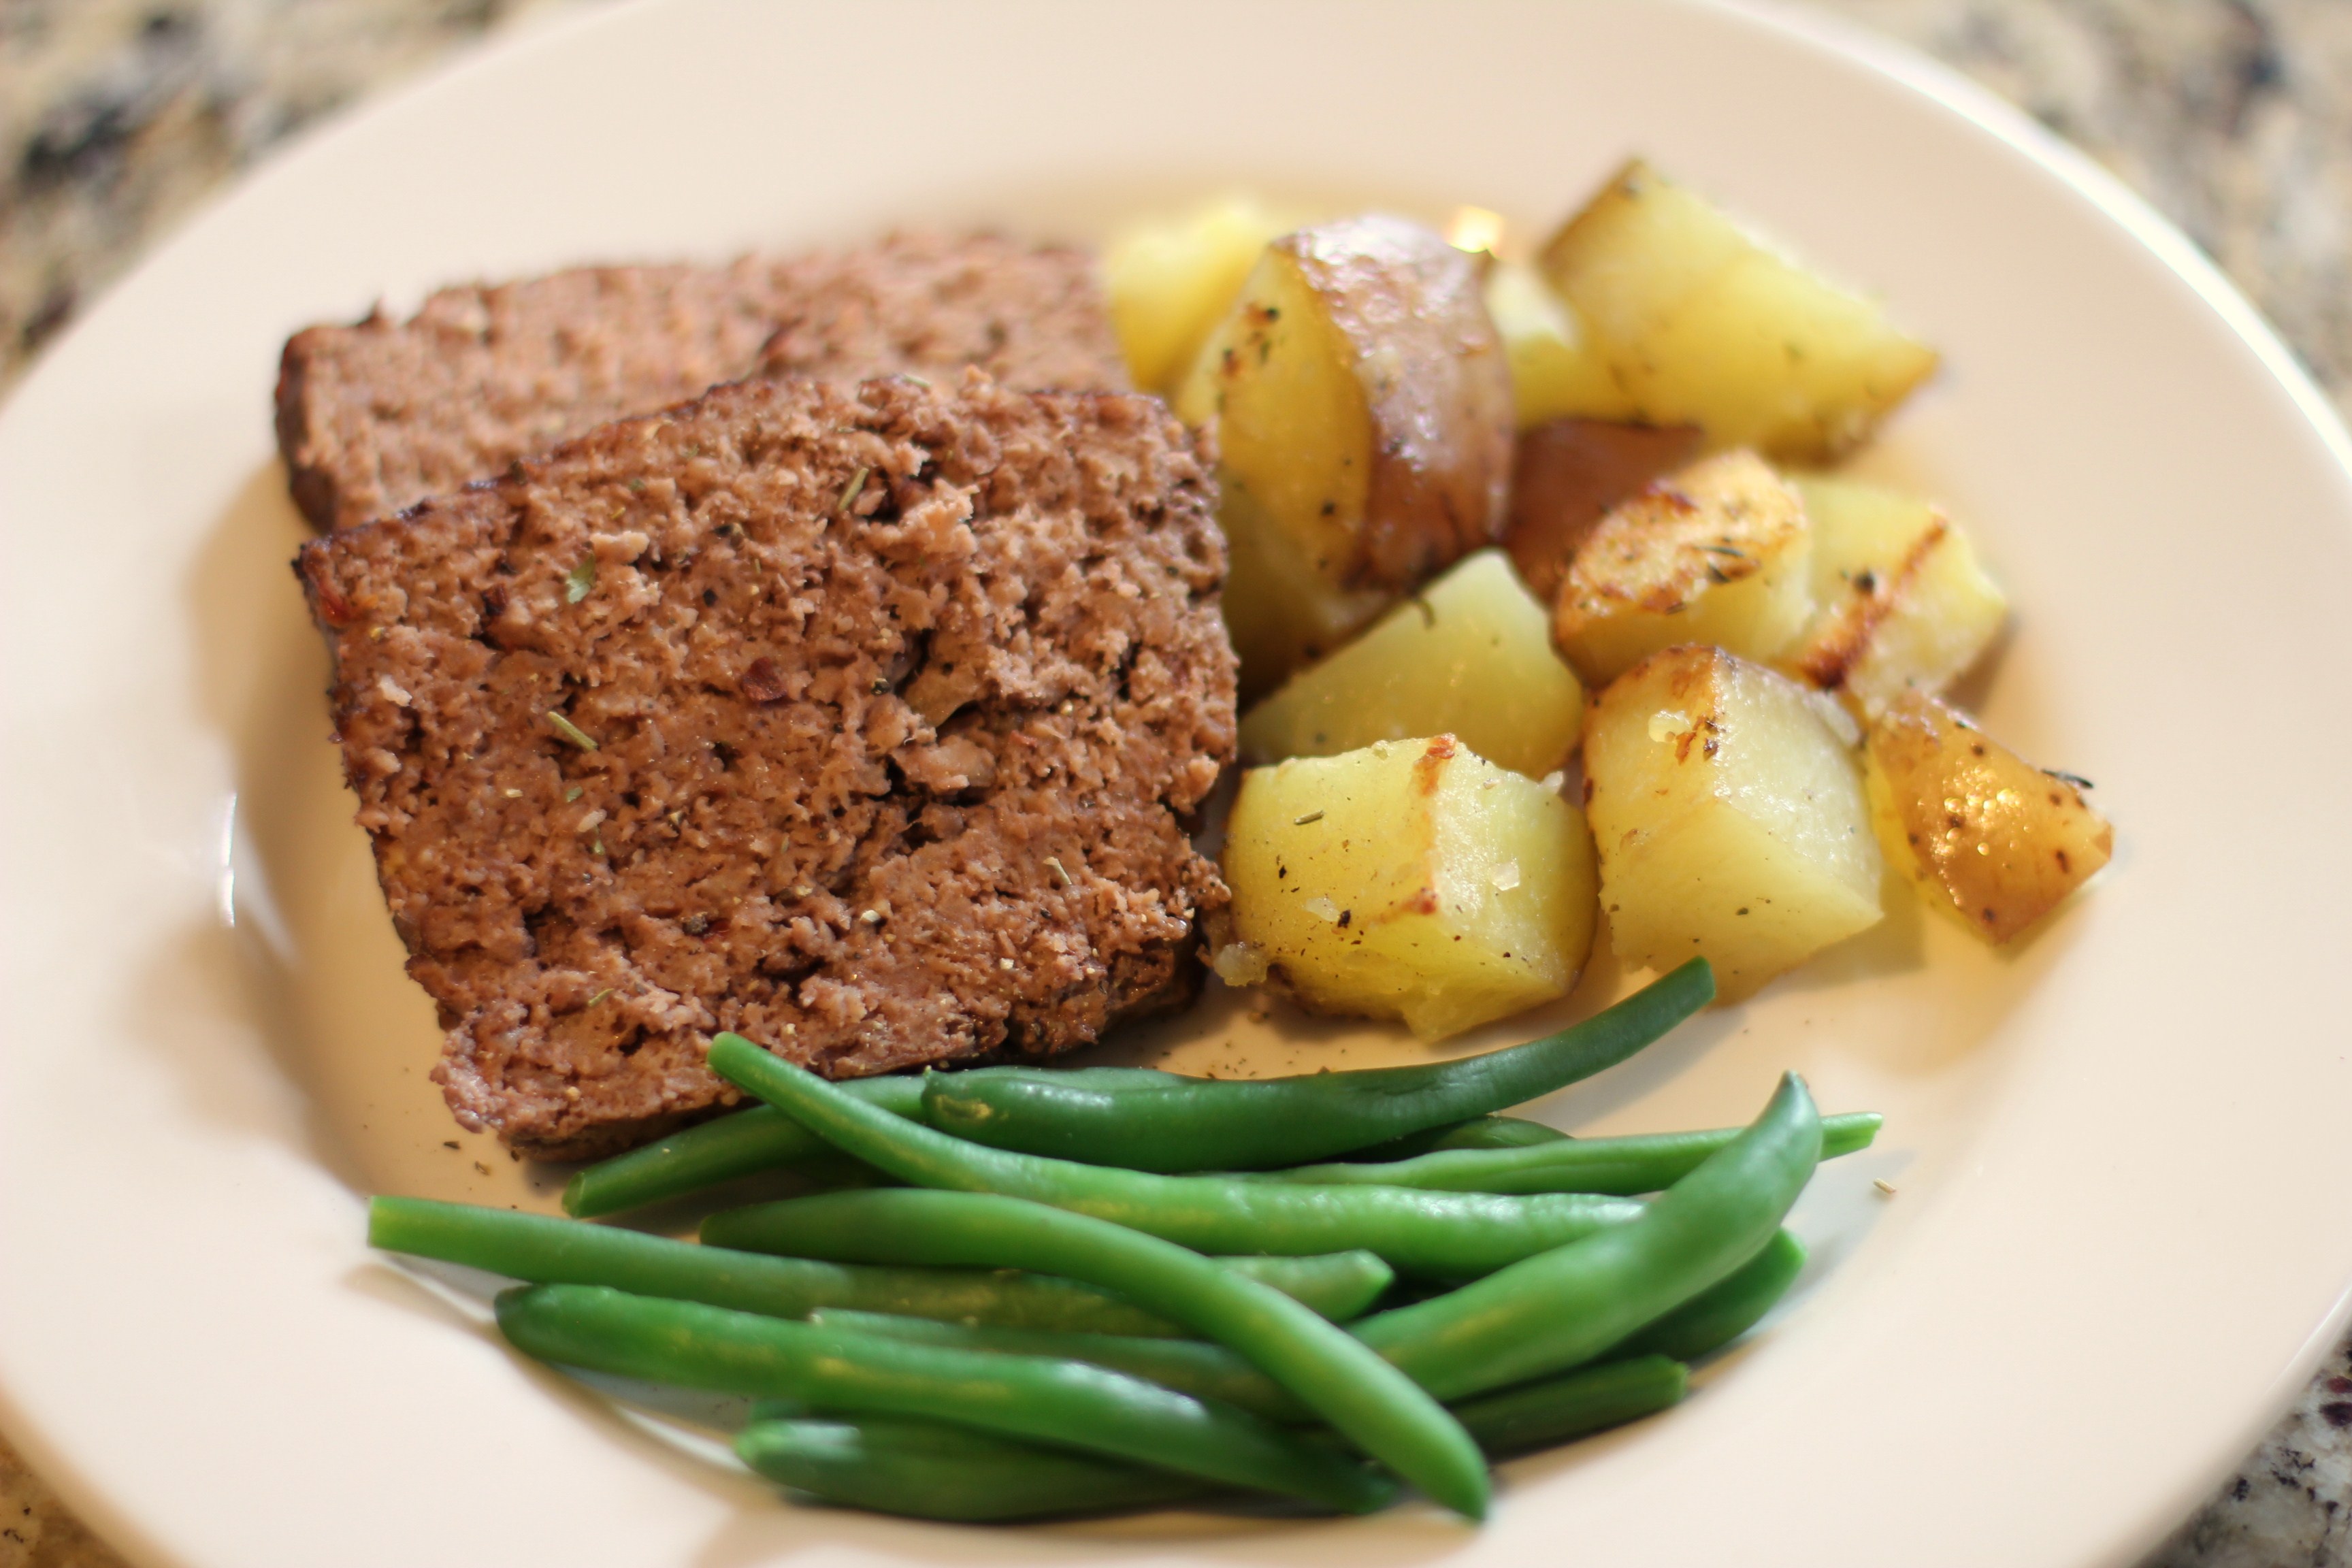 Recipe: How to Make Meatloaf